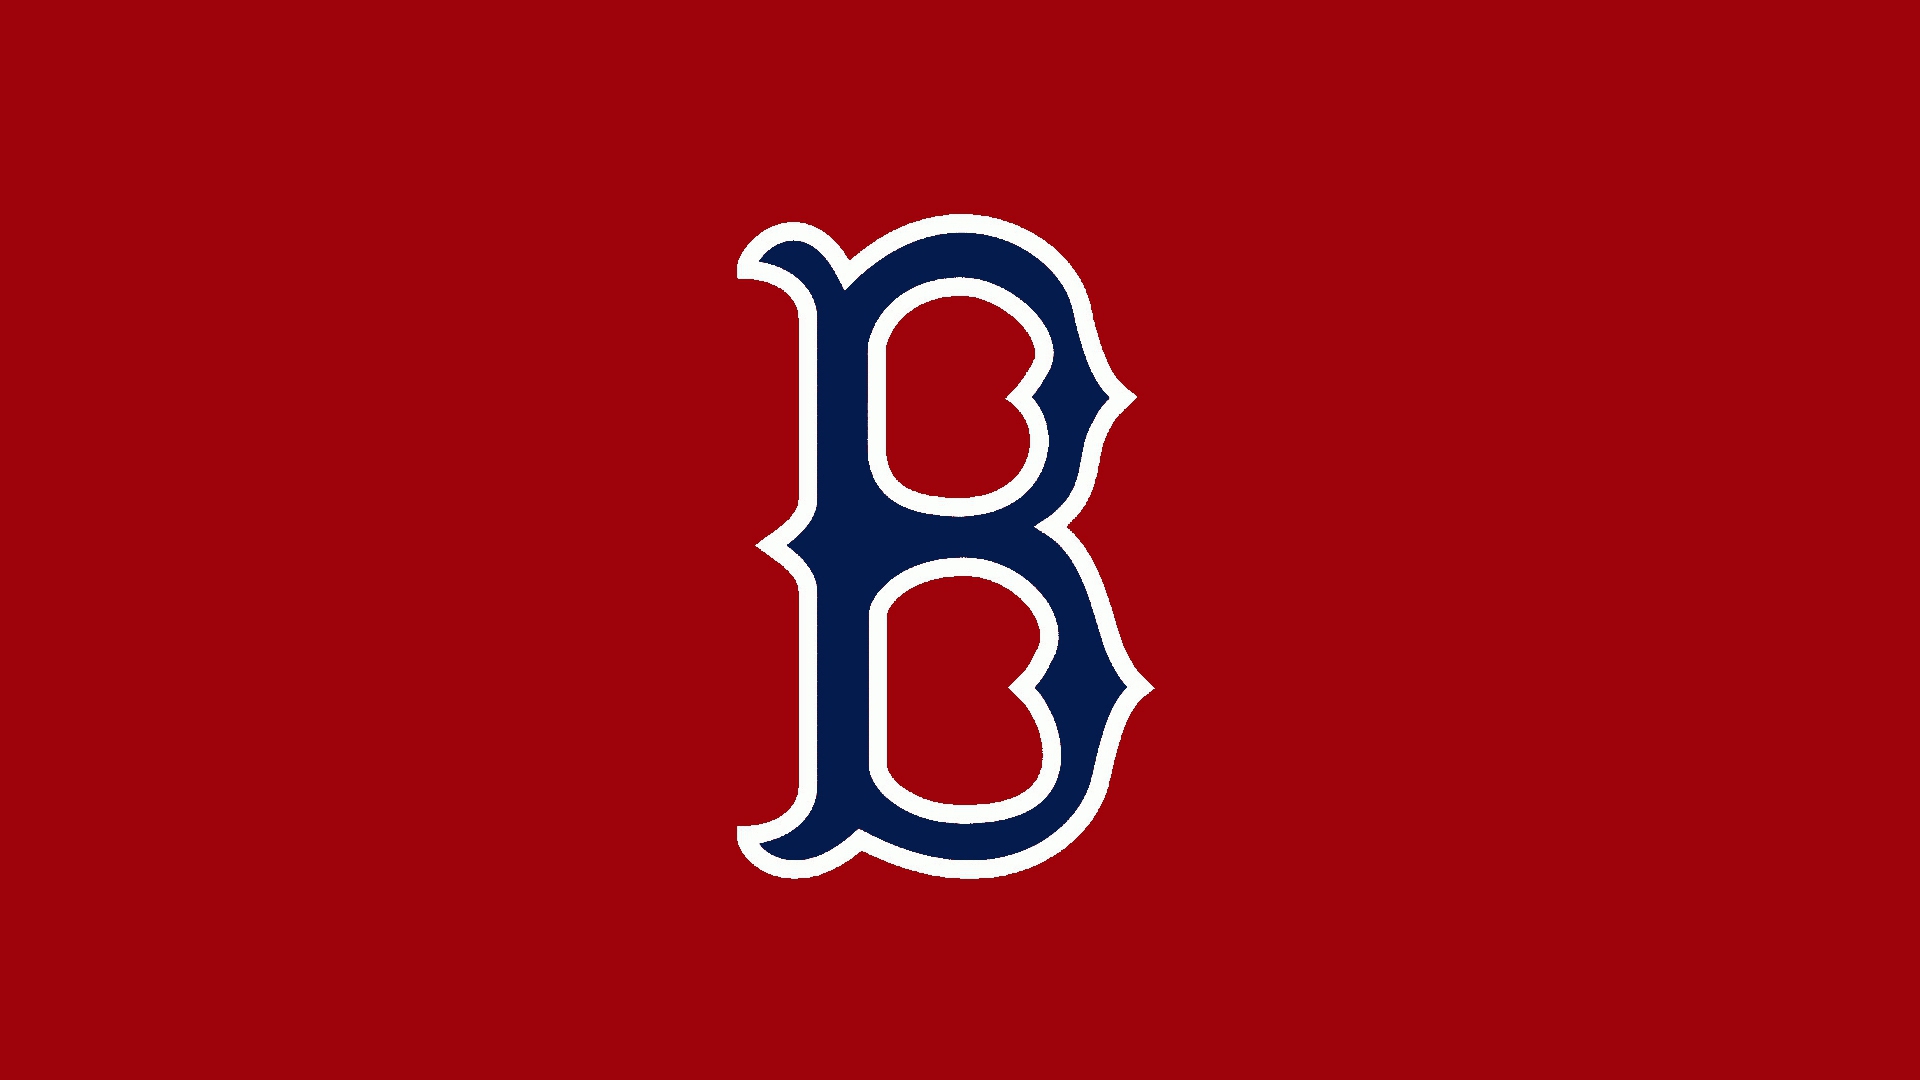 All Boston Red Sox wallpapers.